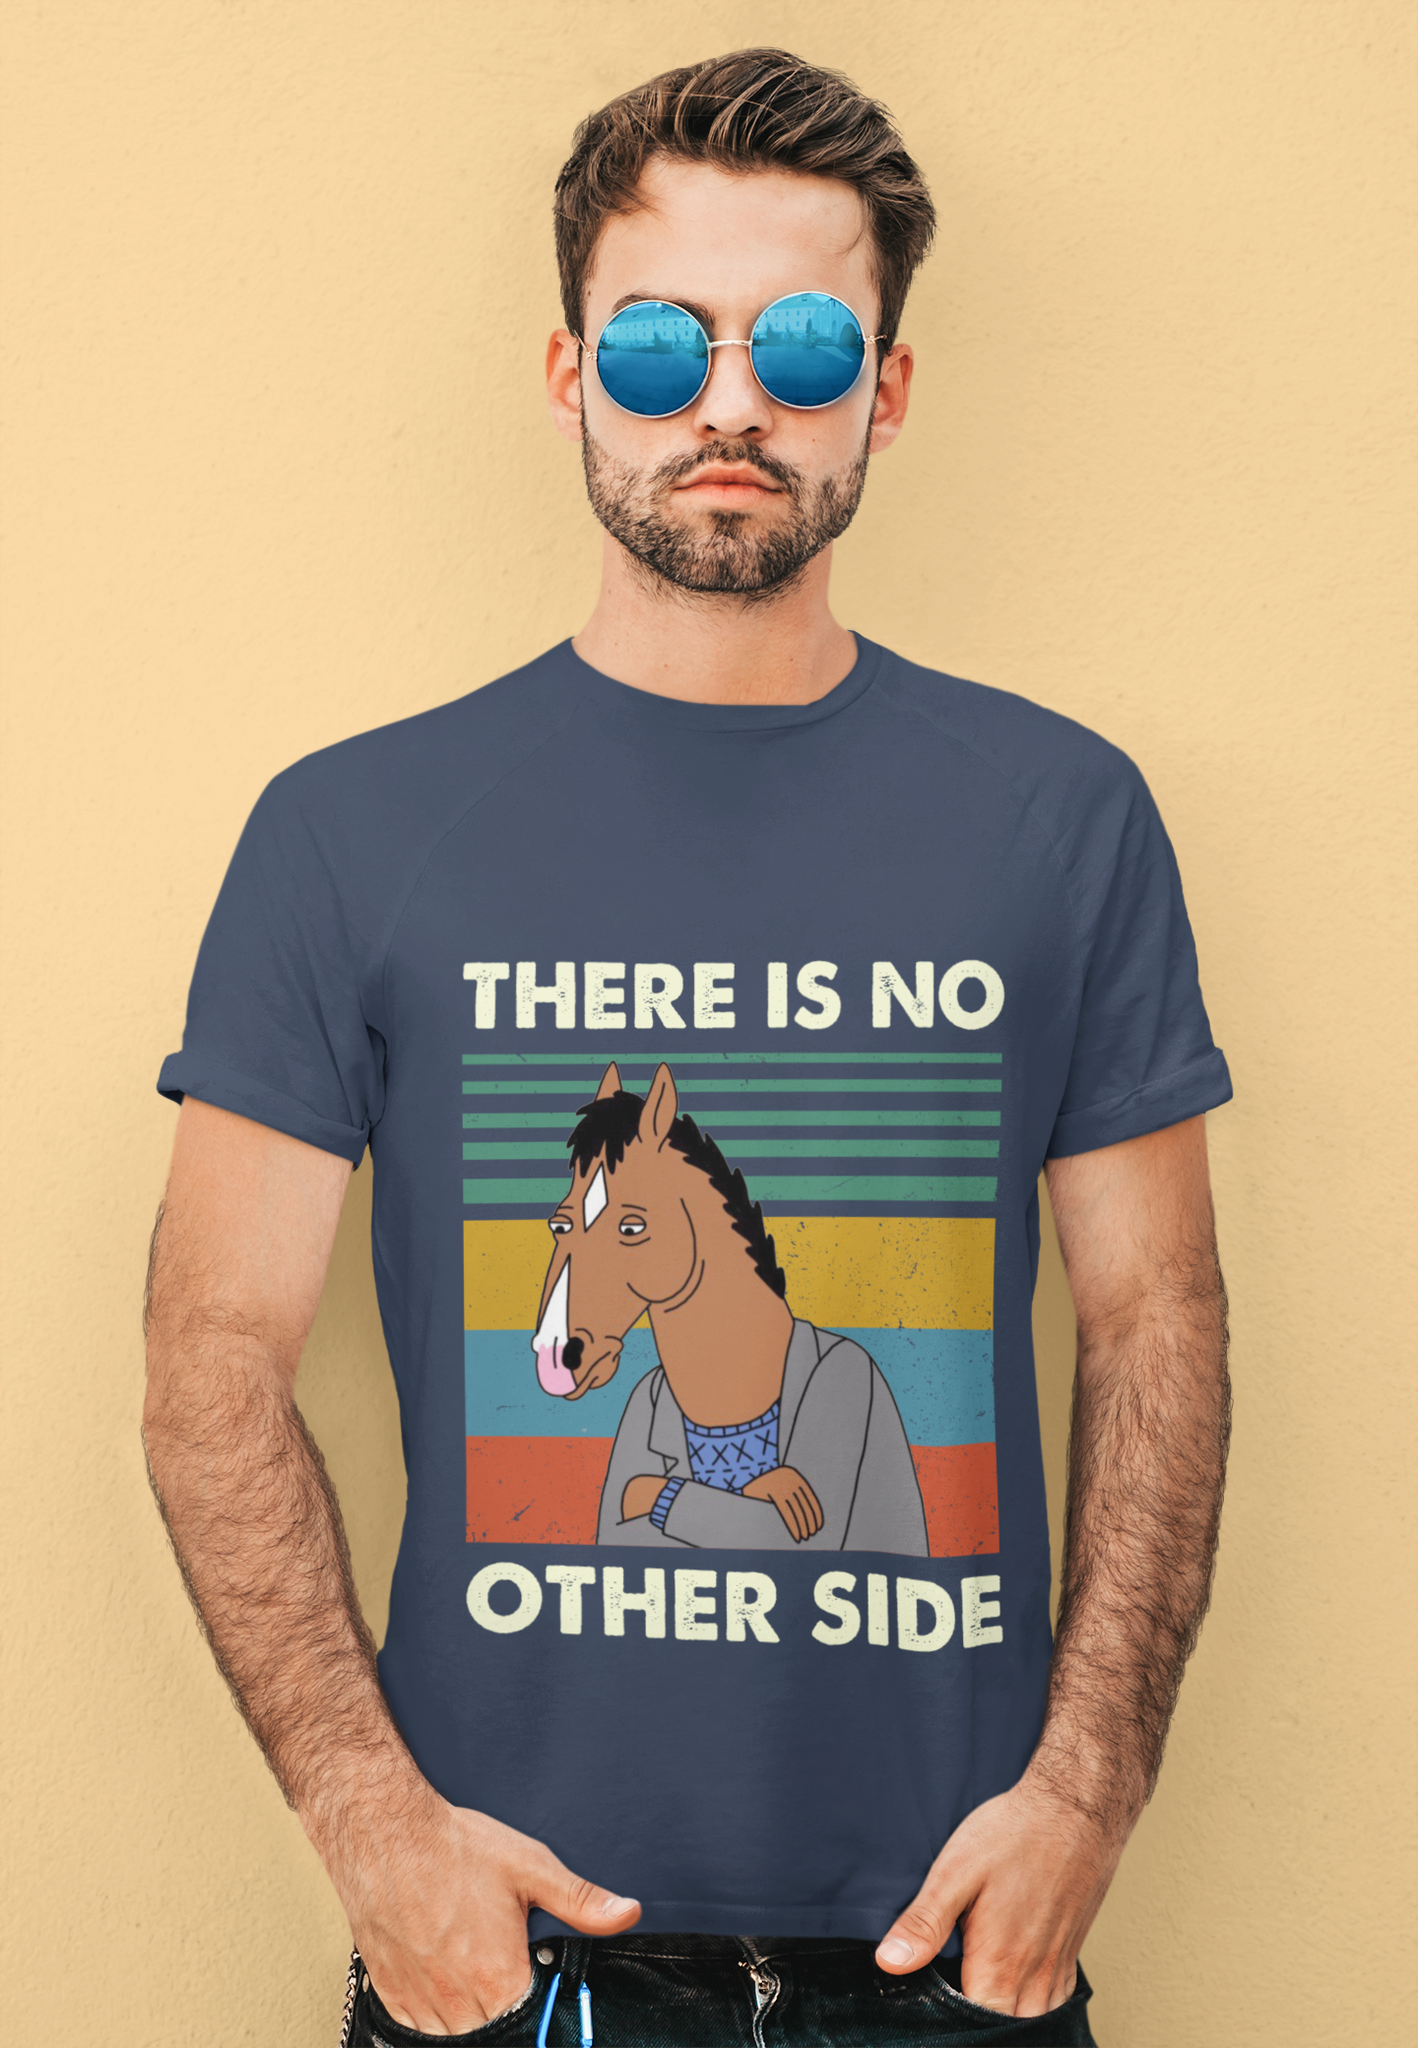 Bojack Horseman Vintage T Shirt, There Is No Other Side Tshirt